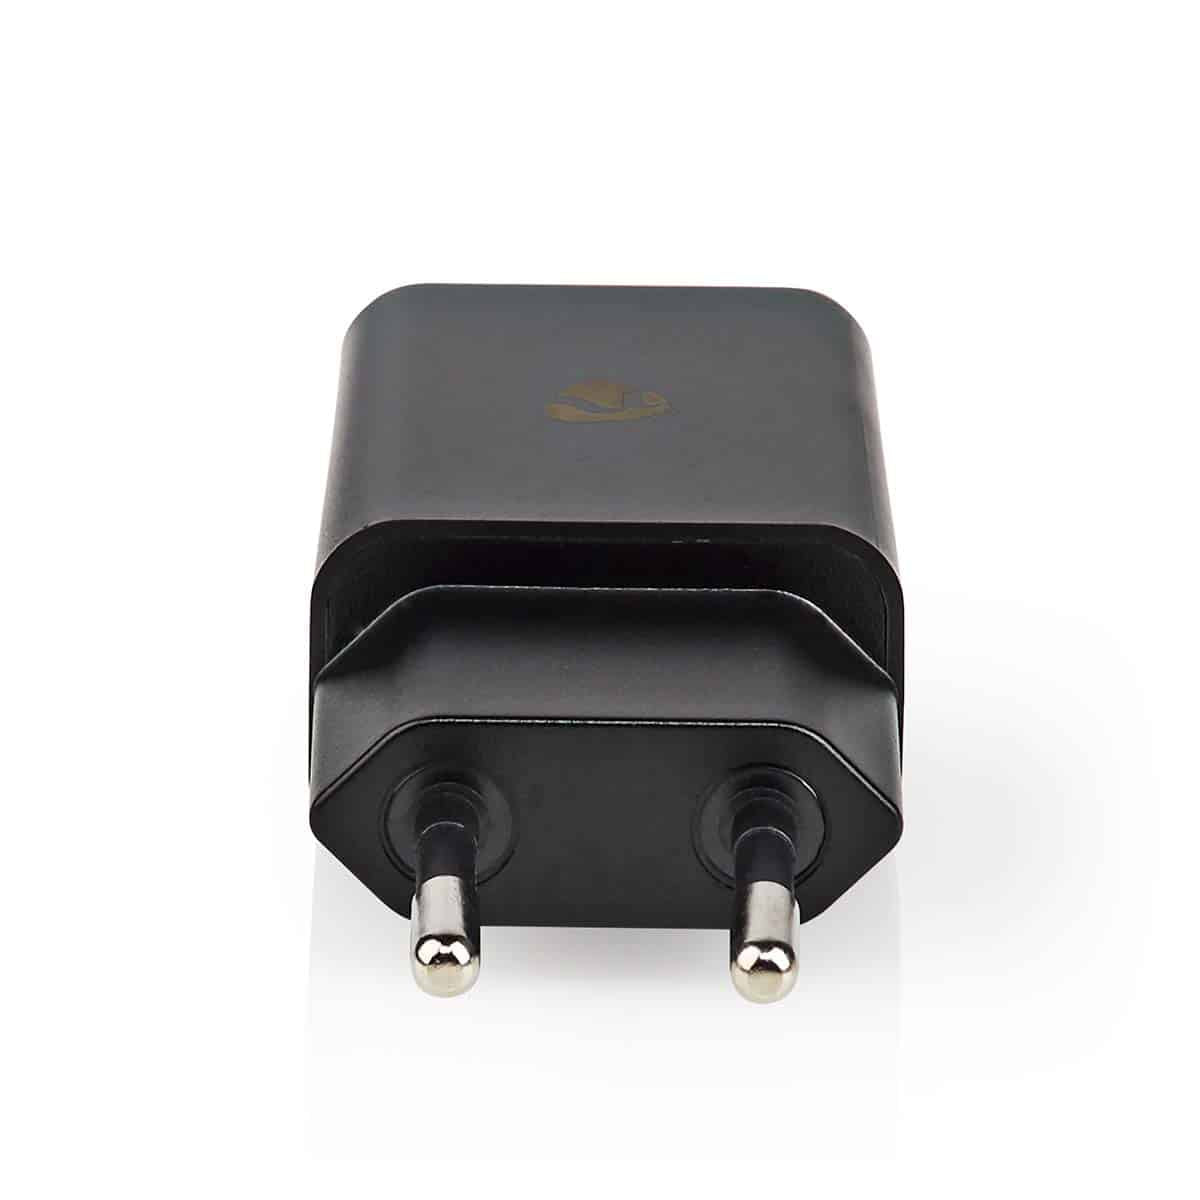 Nedis USB Charger 12 W | 1 meter